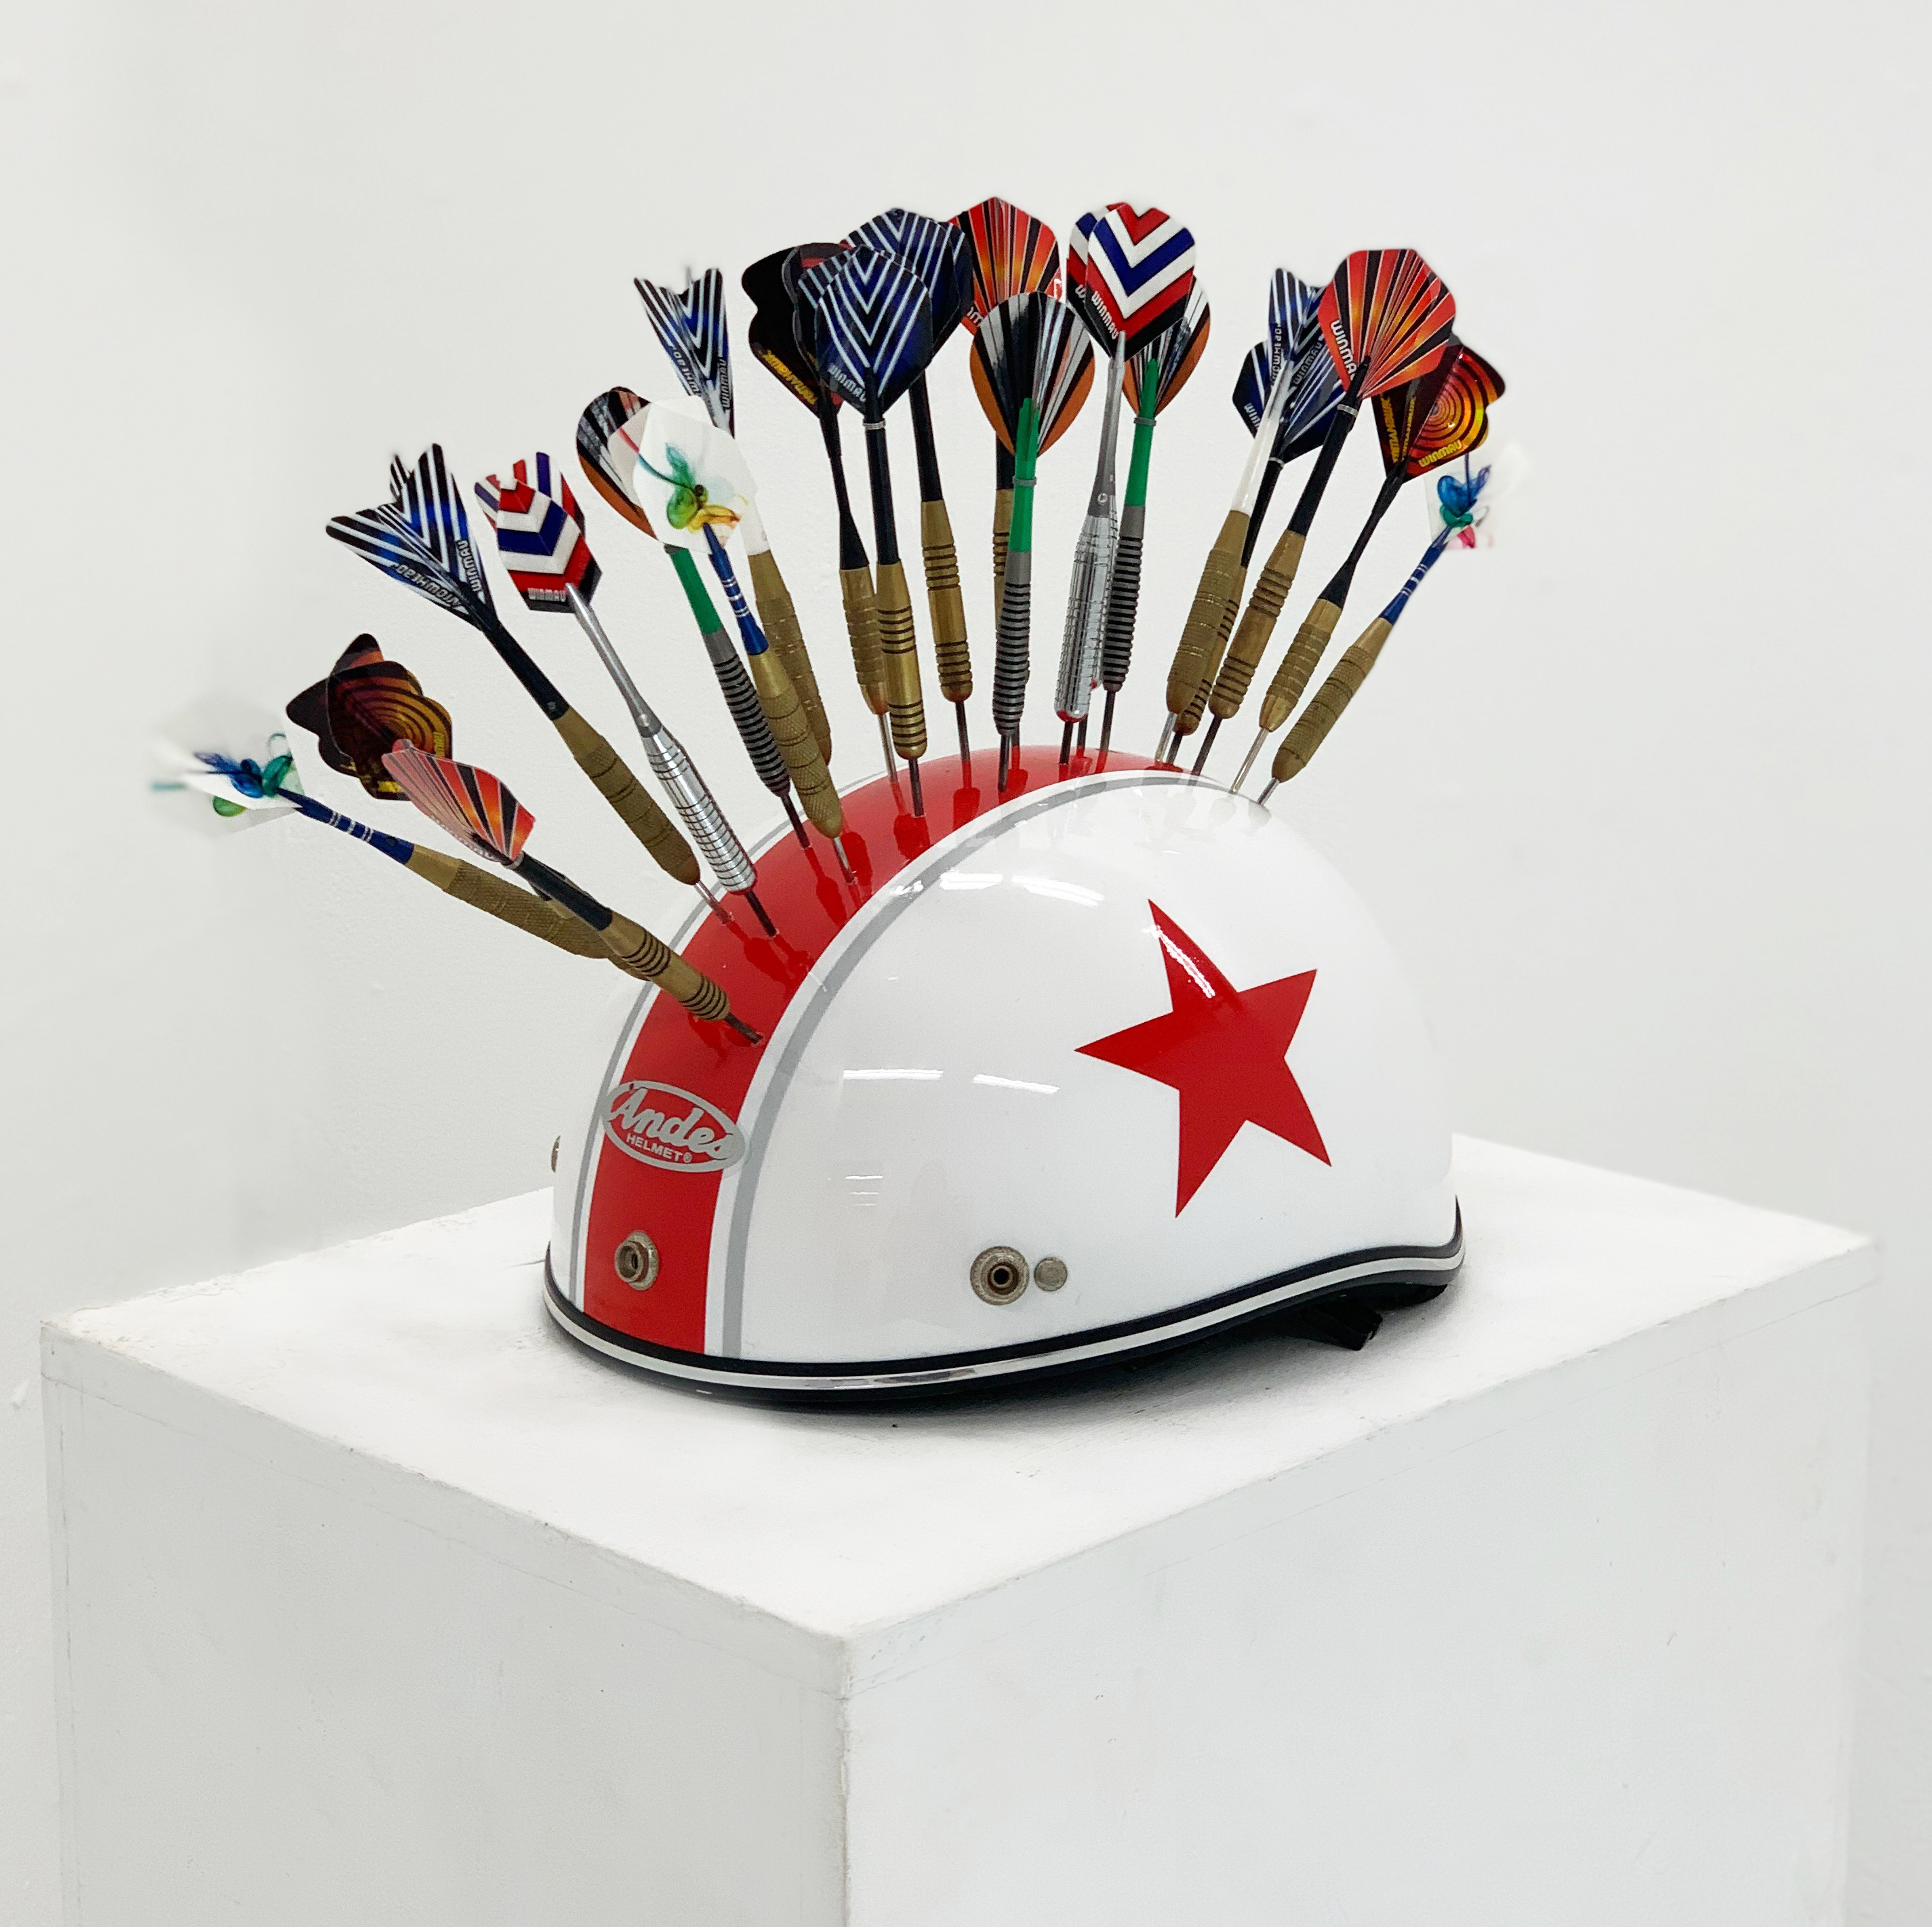 "Untitled" (Helmet and darts.) 2019. - Found objects.